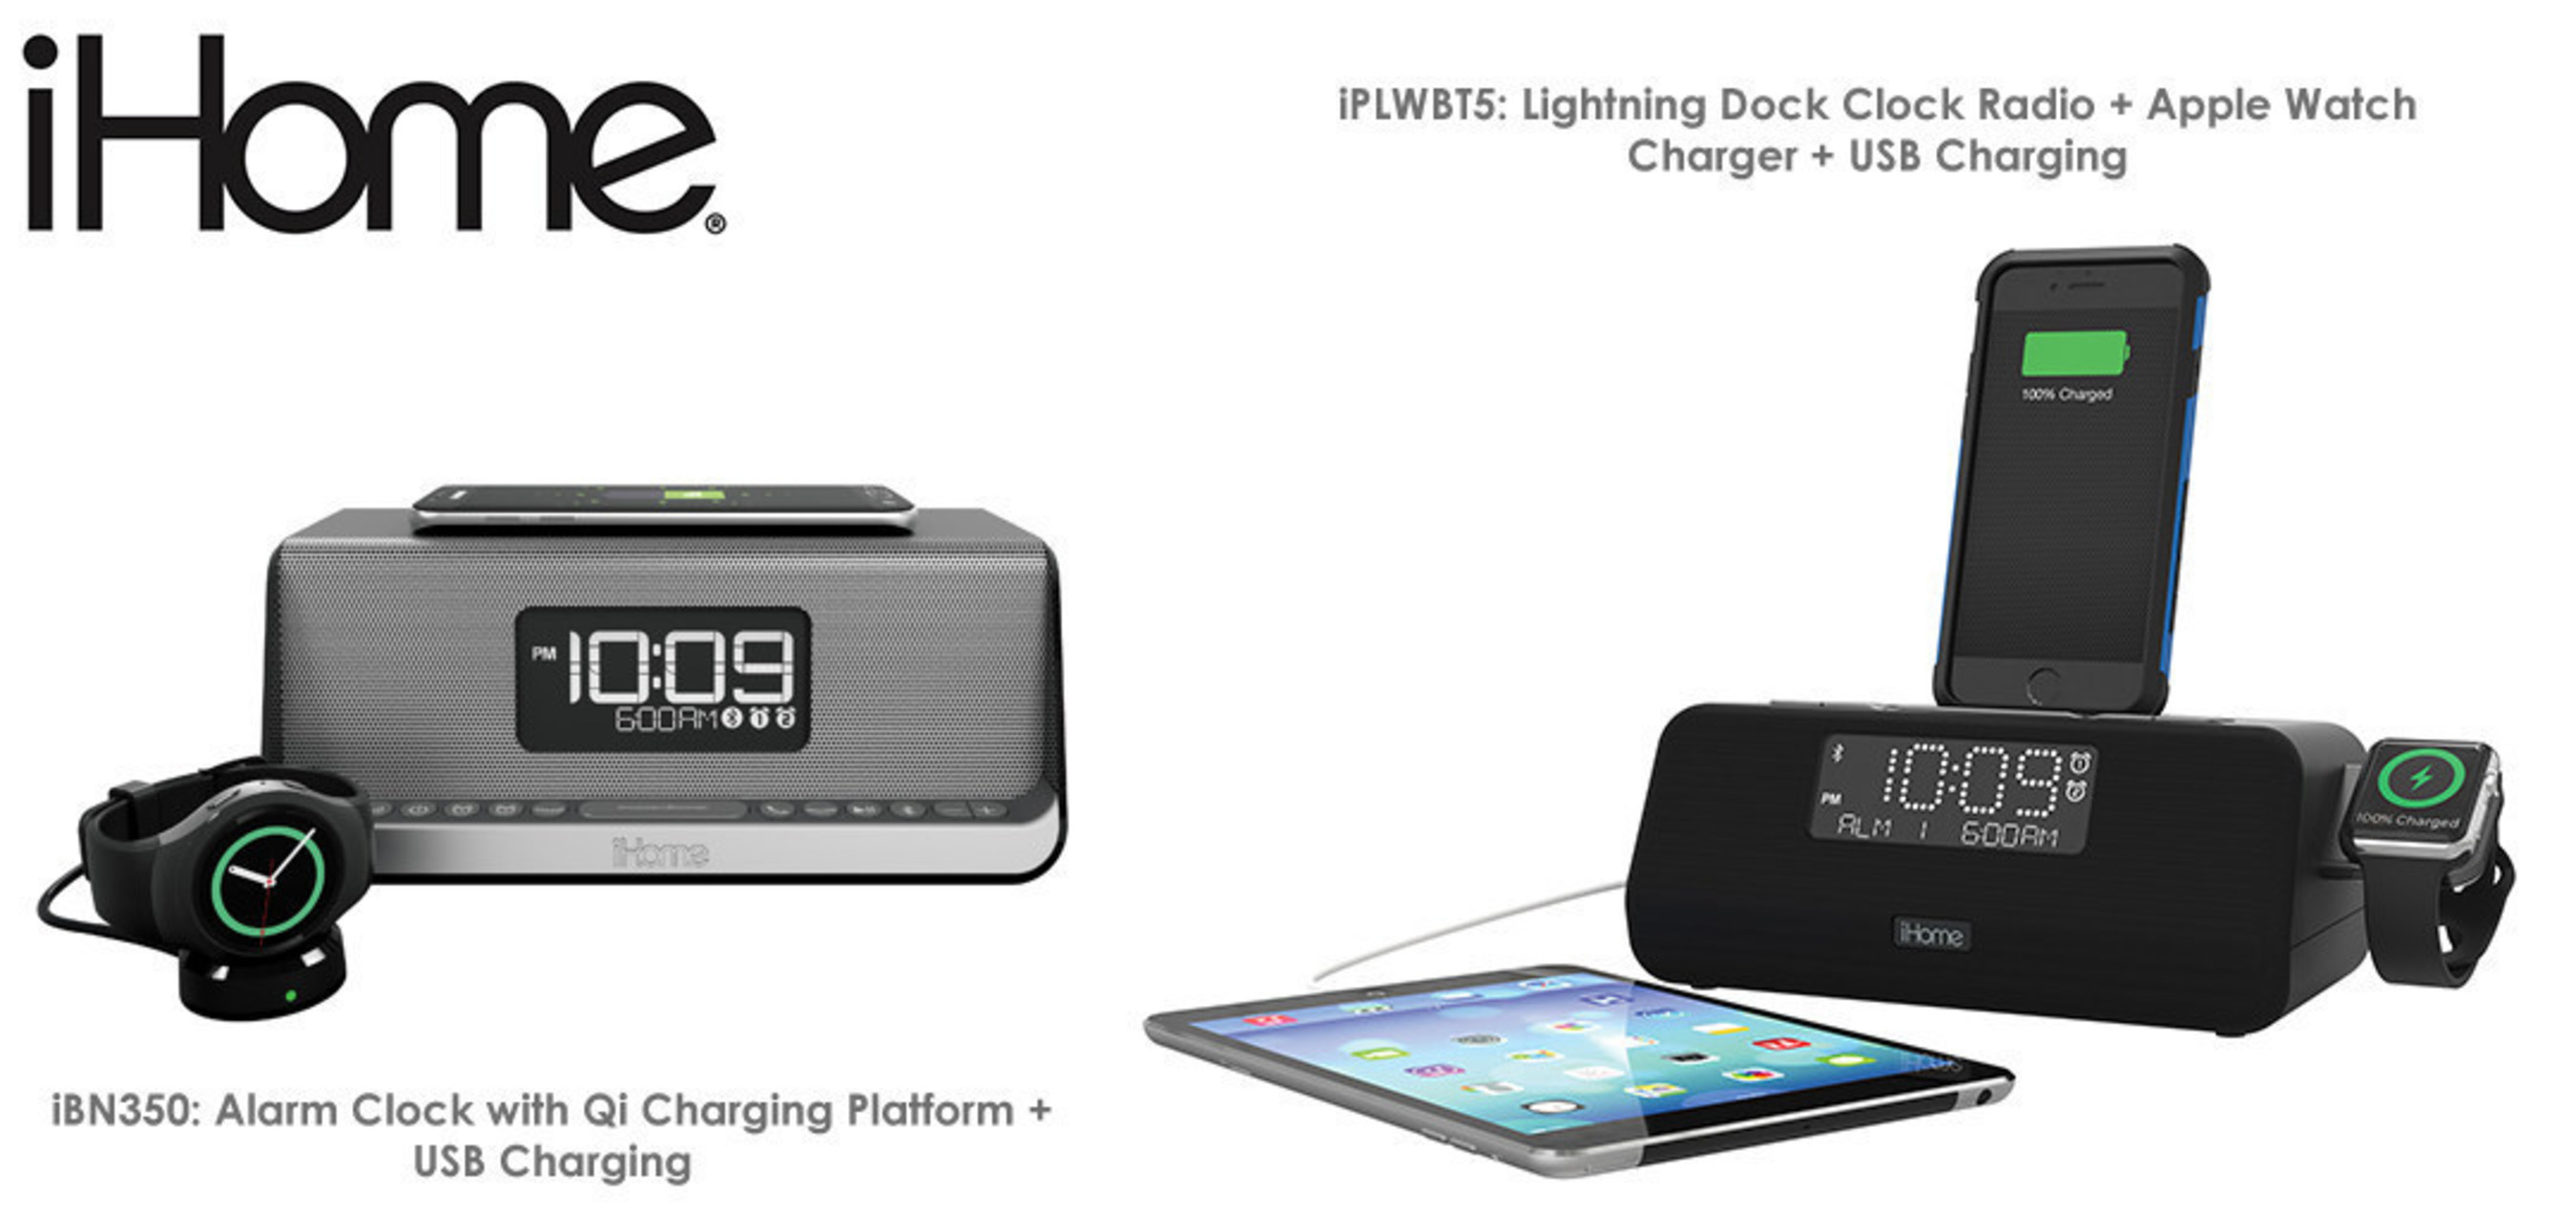 iHome's new iPLWBT5 and iBN350 deliver hassle-free charging for Apple Watch and Qi Compatible Android Devices